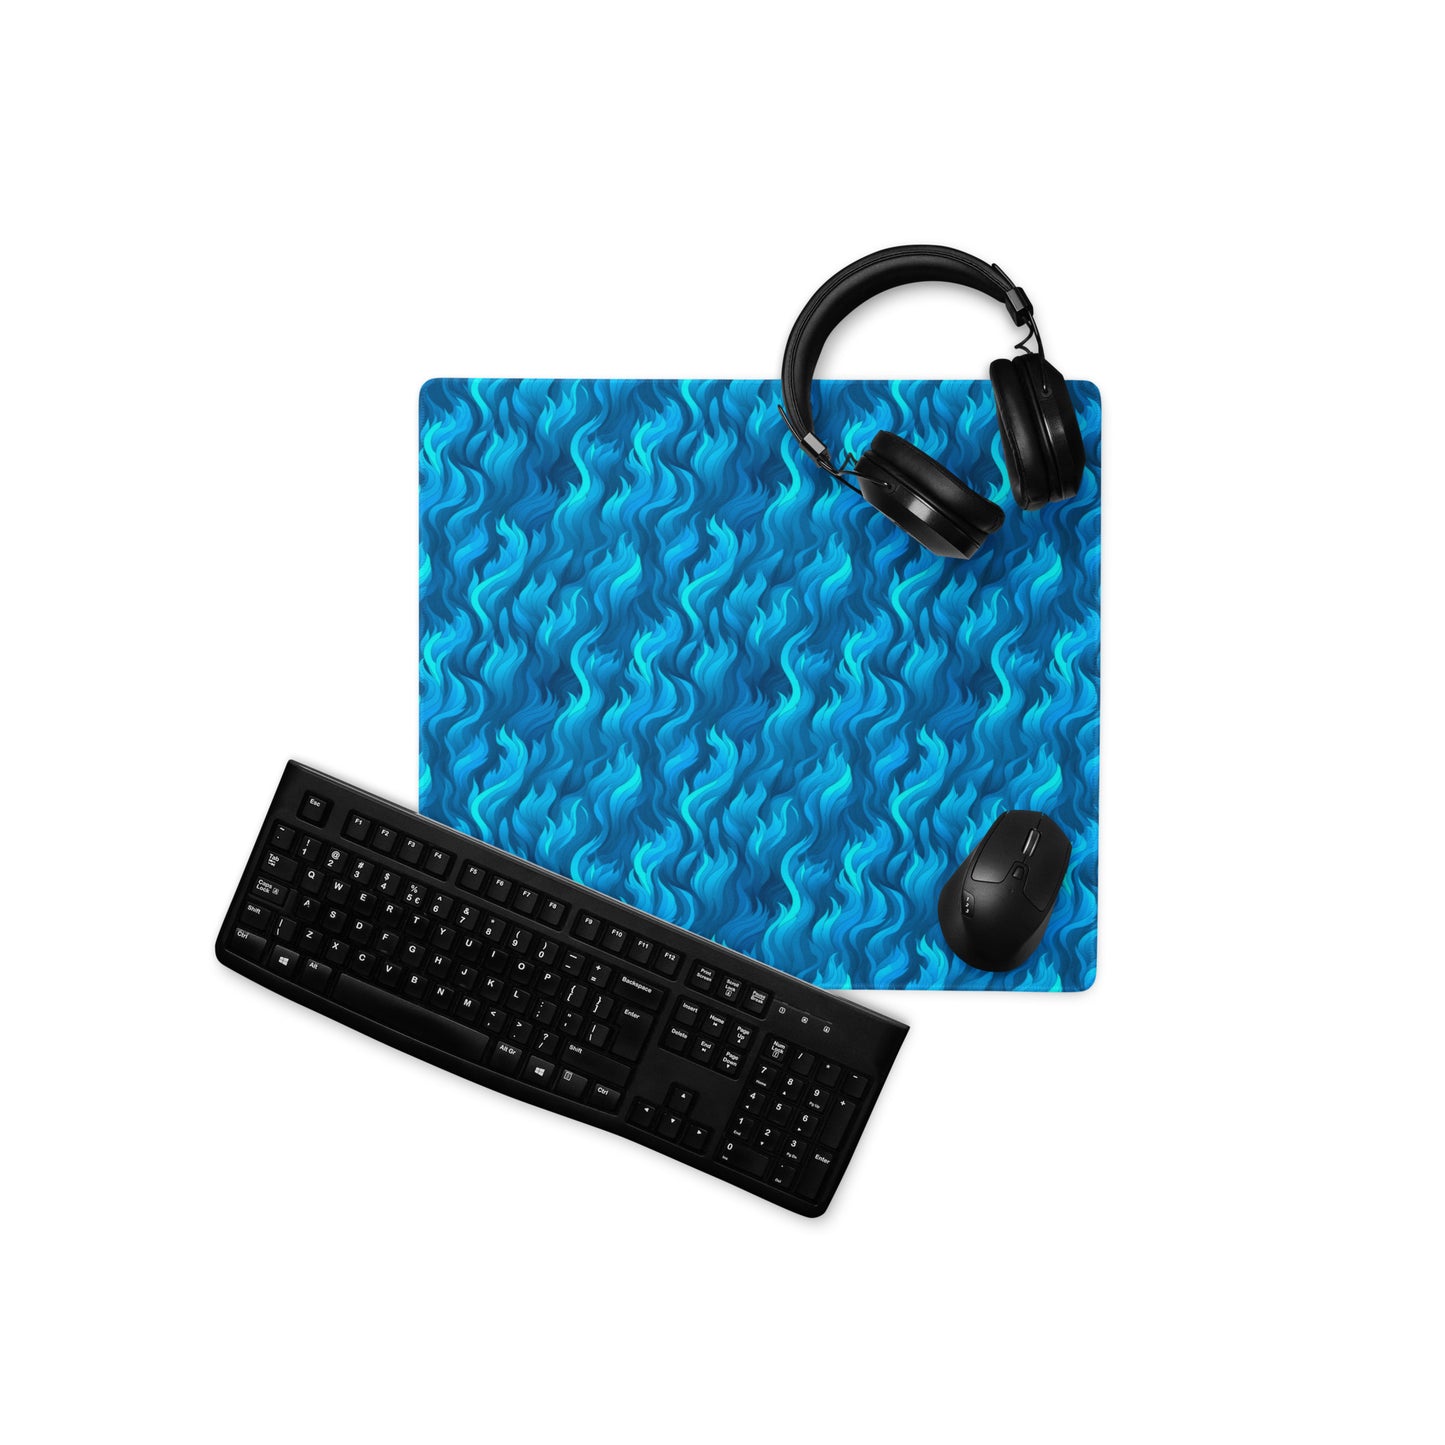 A 18" x 16" desk pad with a wavy flame pattern on it displayed with a keyboard, headphones and a mouse. Blue in color.